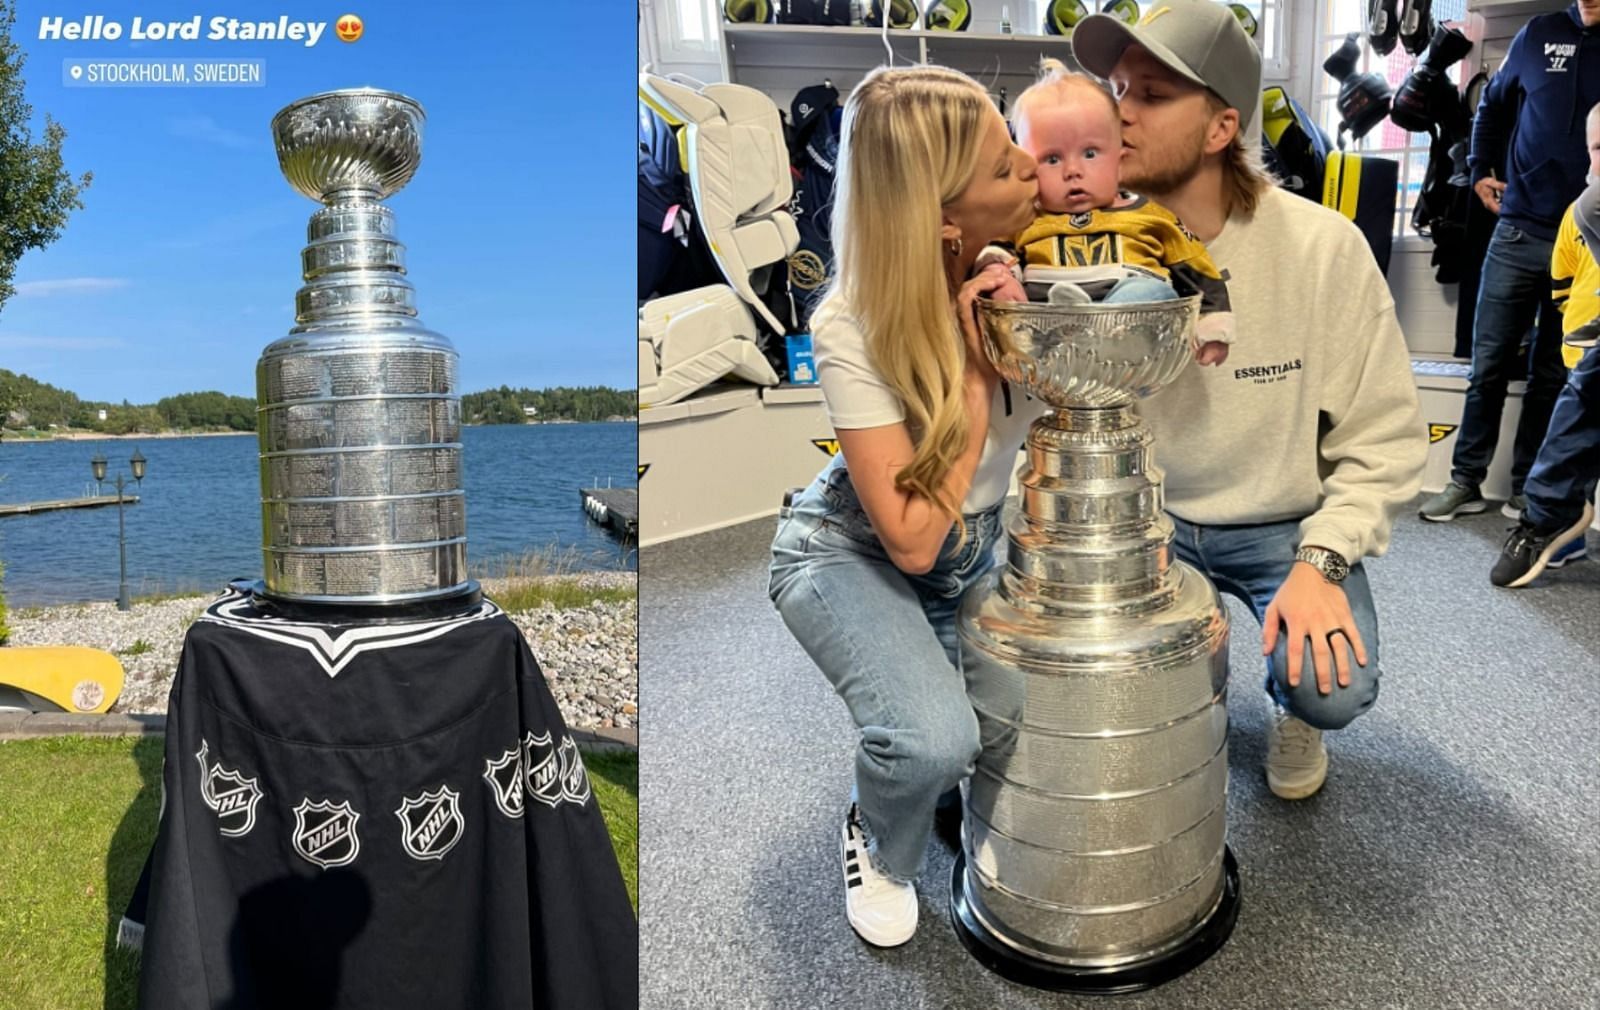 William Karlsson's new baby boy is living the life! #StanleyCup #Champ